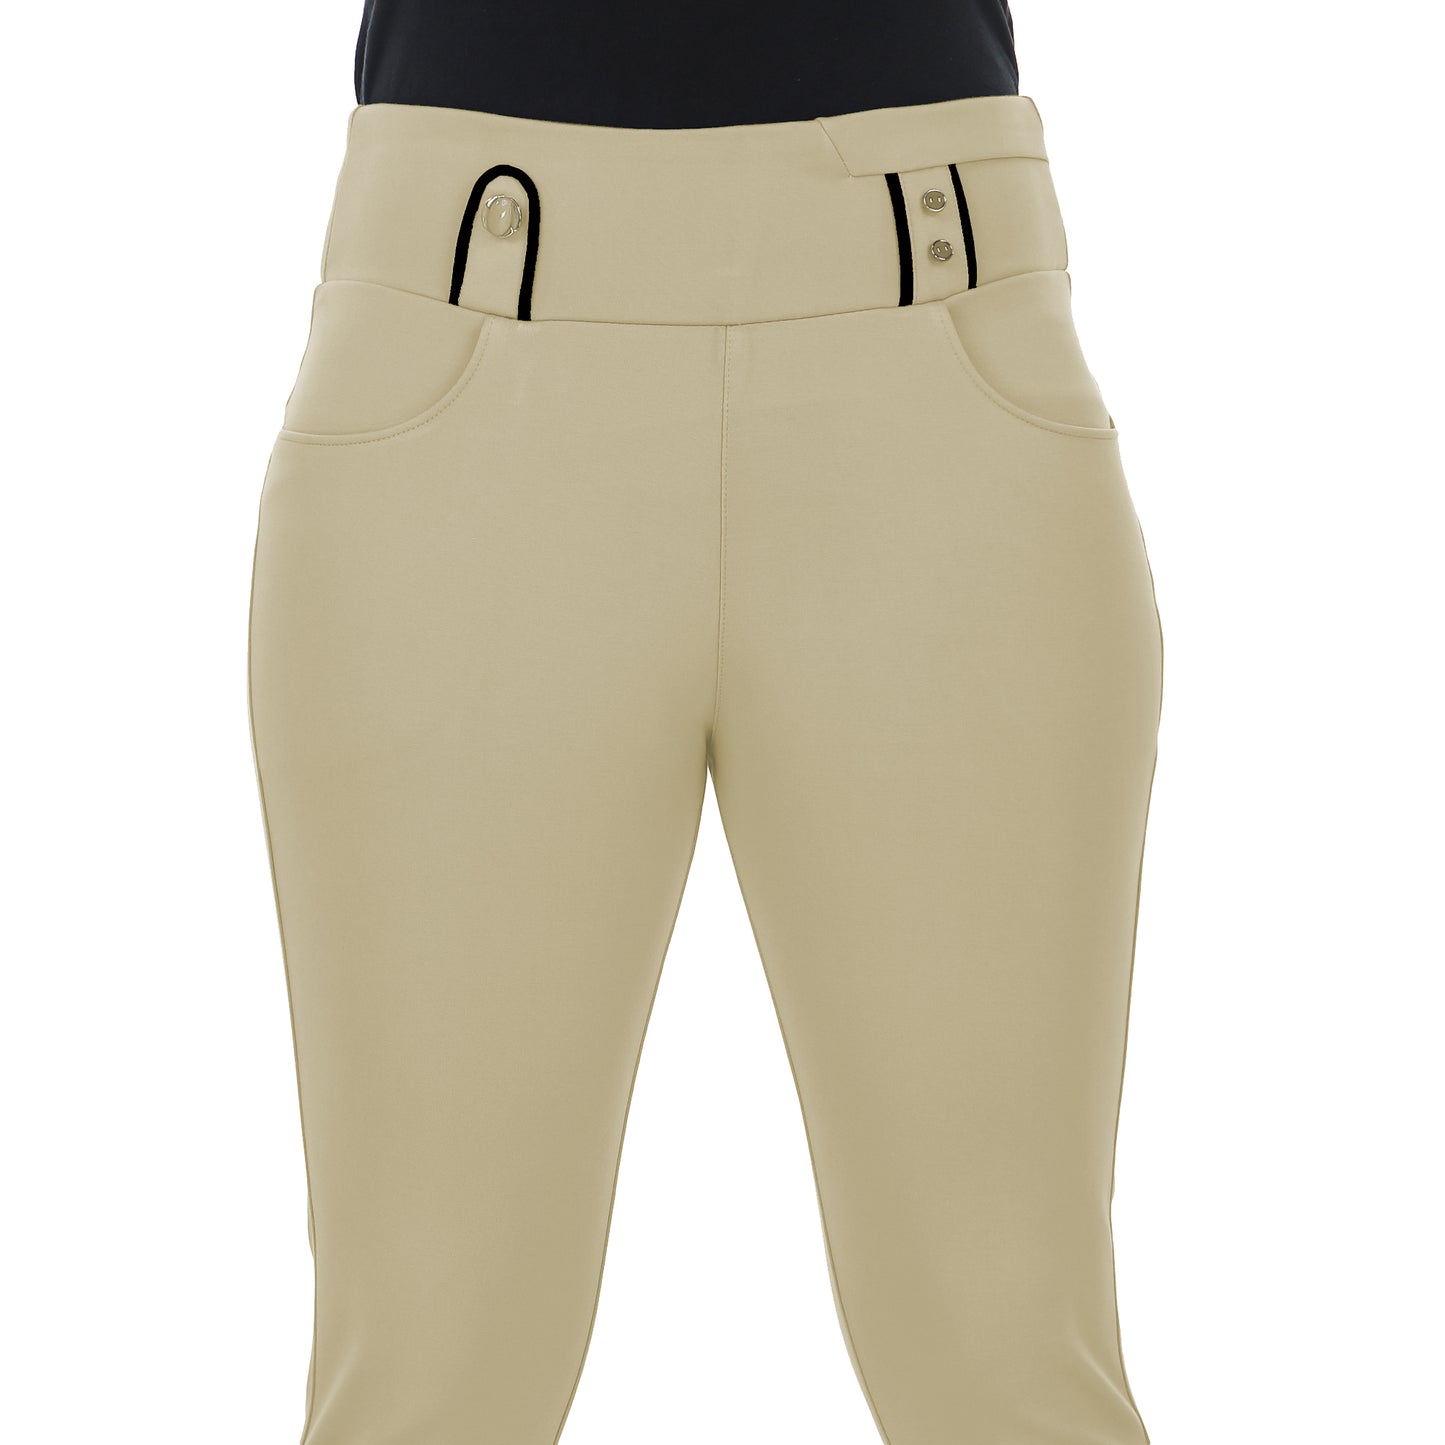 ComfortFit Women's Mid-Waist Jeggings with 2 Front Pockets -Ivory